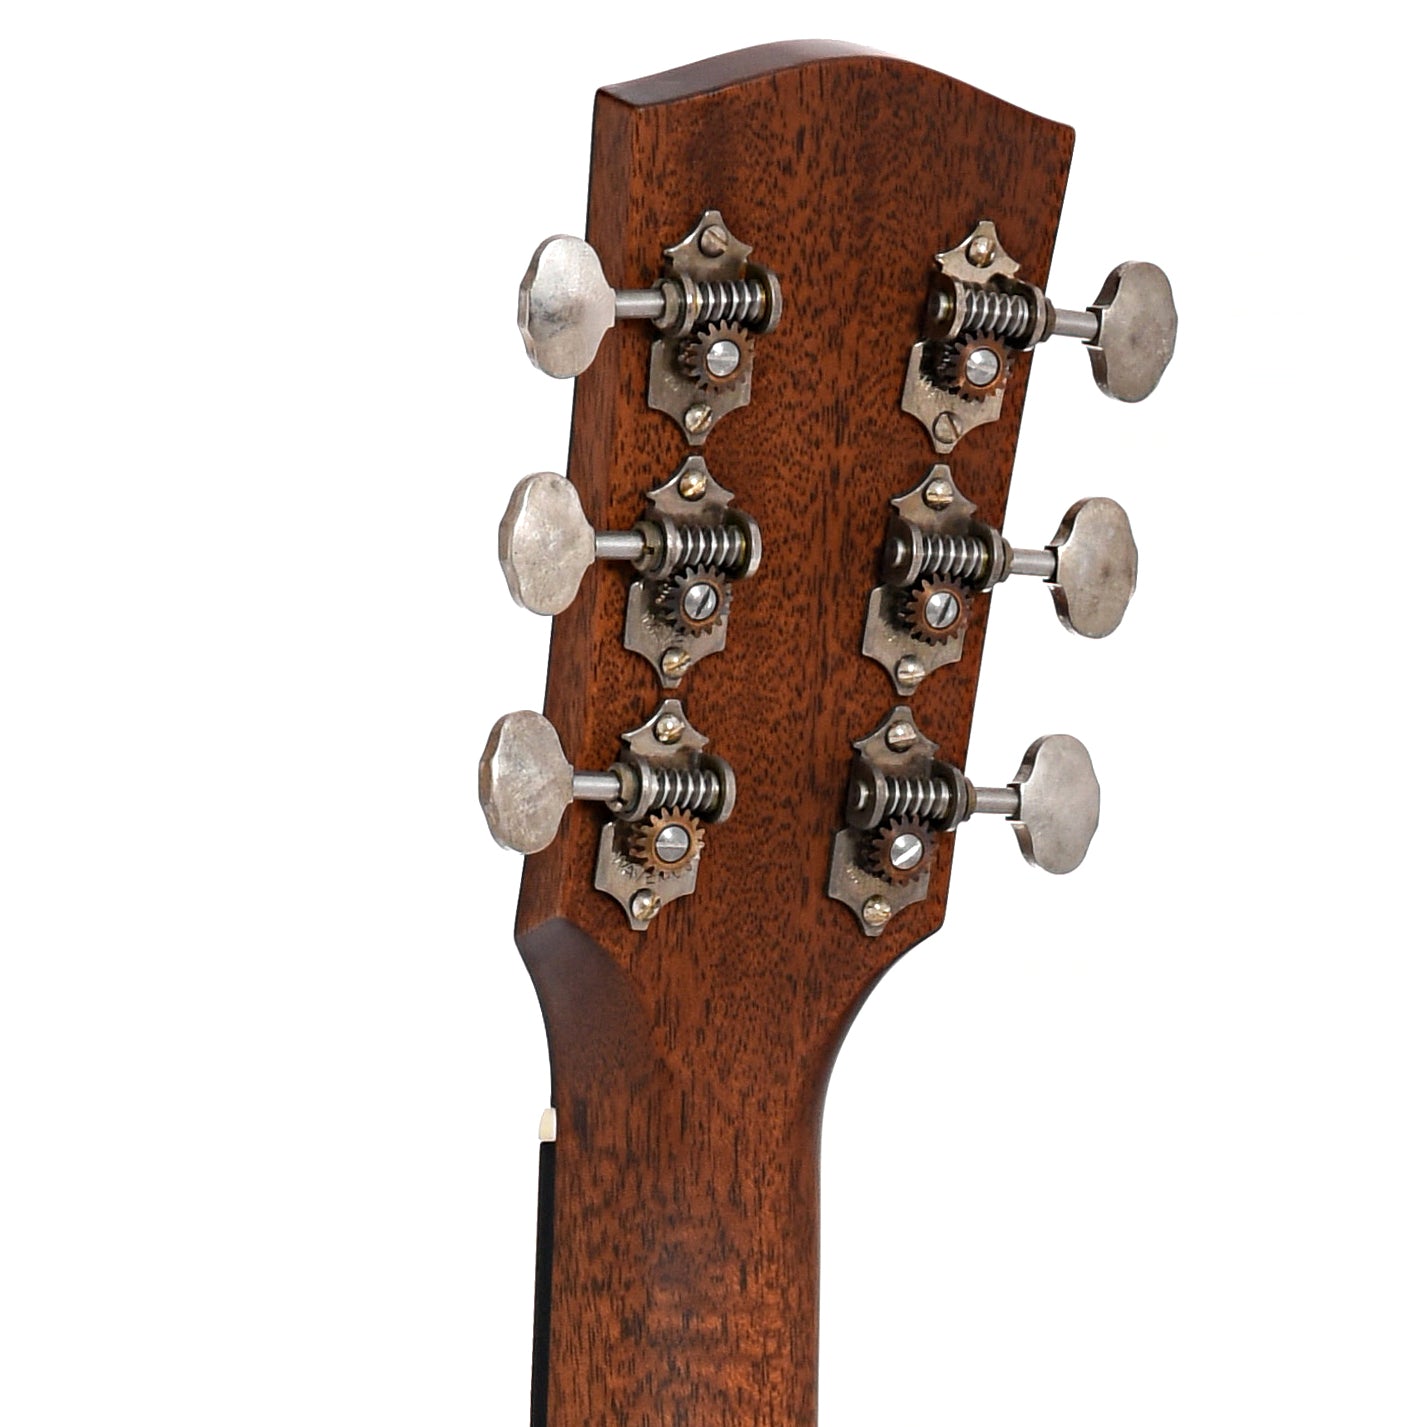 Image 8 of Bedell Coffee House Orchestra Acoustic Guitar, Adirondack Spruce & Indian Rosewood- SKU# BEDCOM : Product Type Flat-top Guitars : Elderly Instruments